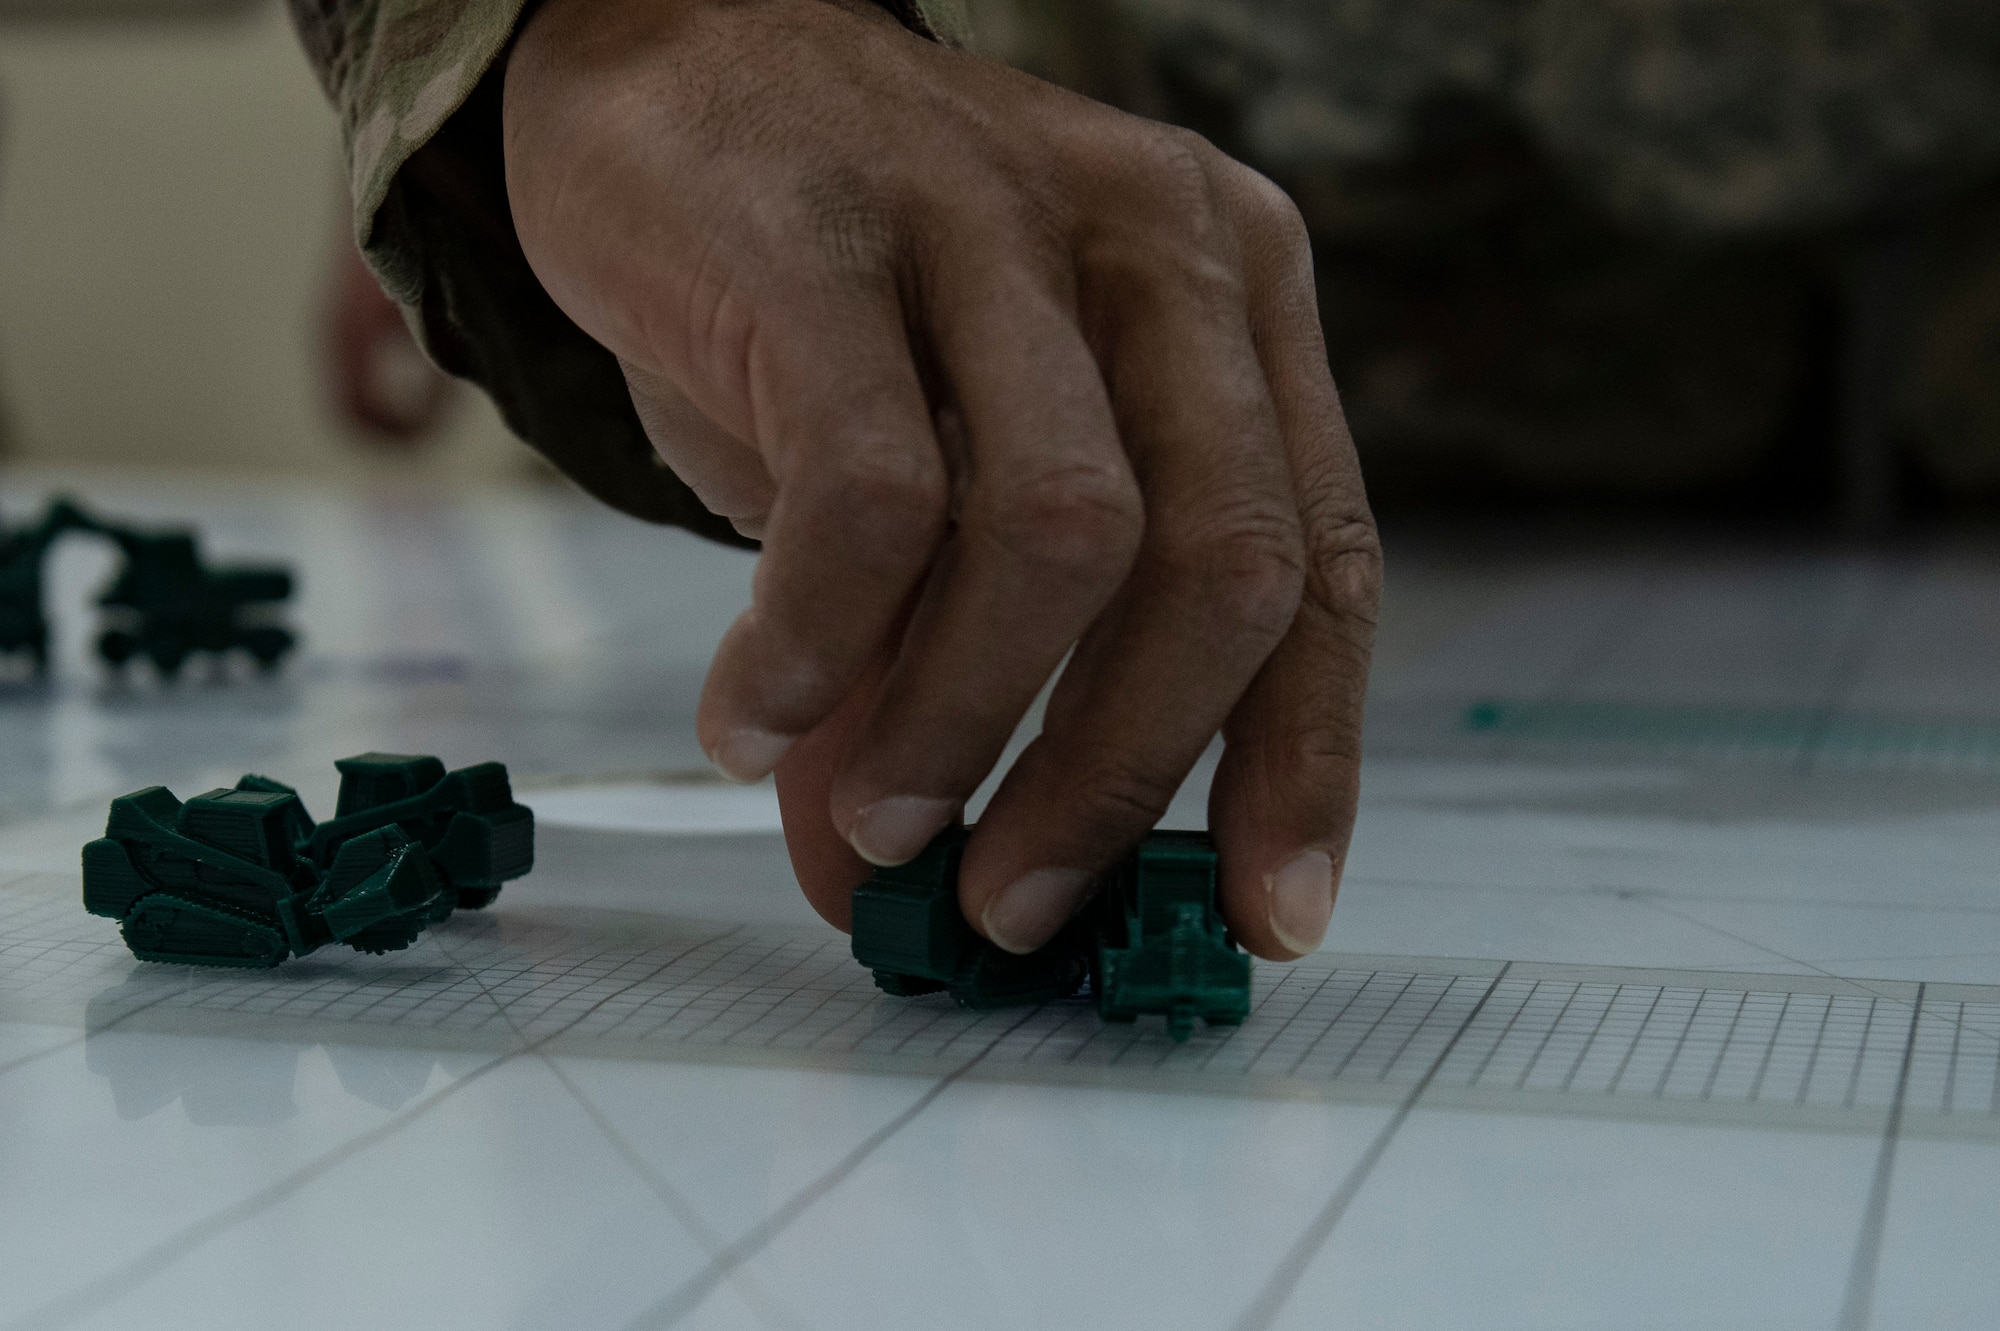 A U.S. Air Force Airman assigned to the 386th Expeditionary Civil Engineer Squadron moves tabletop pieces during the Air and Missile Defense Exercise 21-1 at Ali Al Salem Air Base, Kuwait, Oct. 22, 2020.